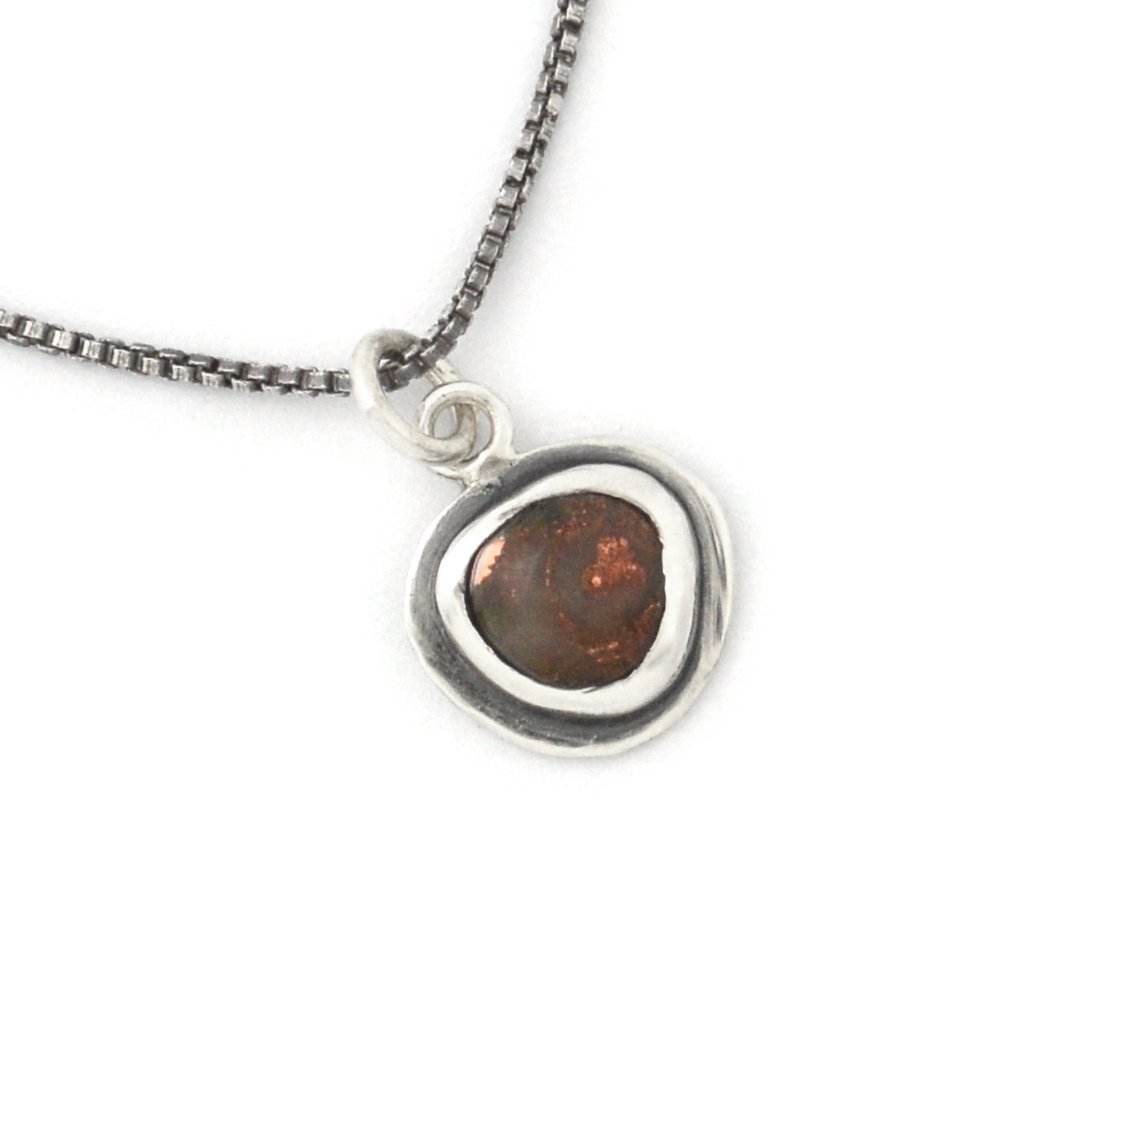 Lake Superior Copper Agate Drop Pendant No. 2 - Silver Pendant   3682 - handmade by Beth Millner Jewelry